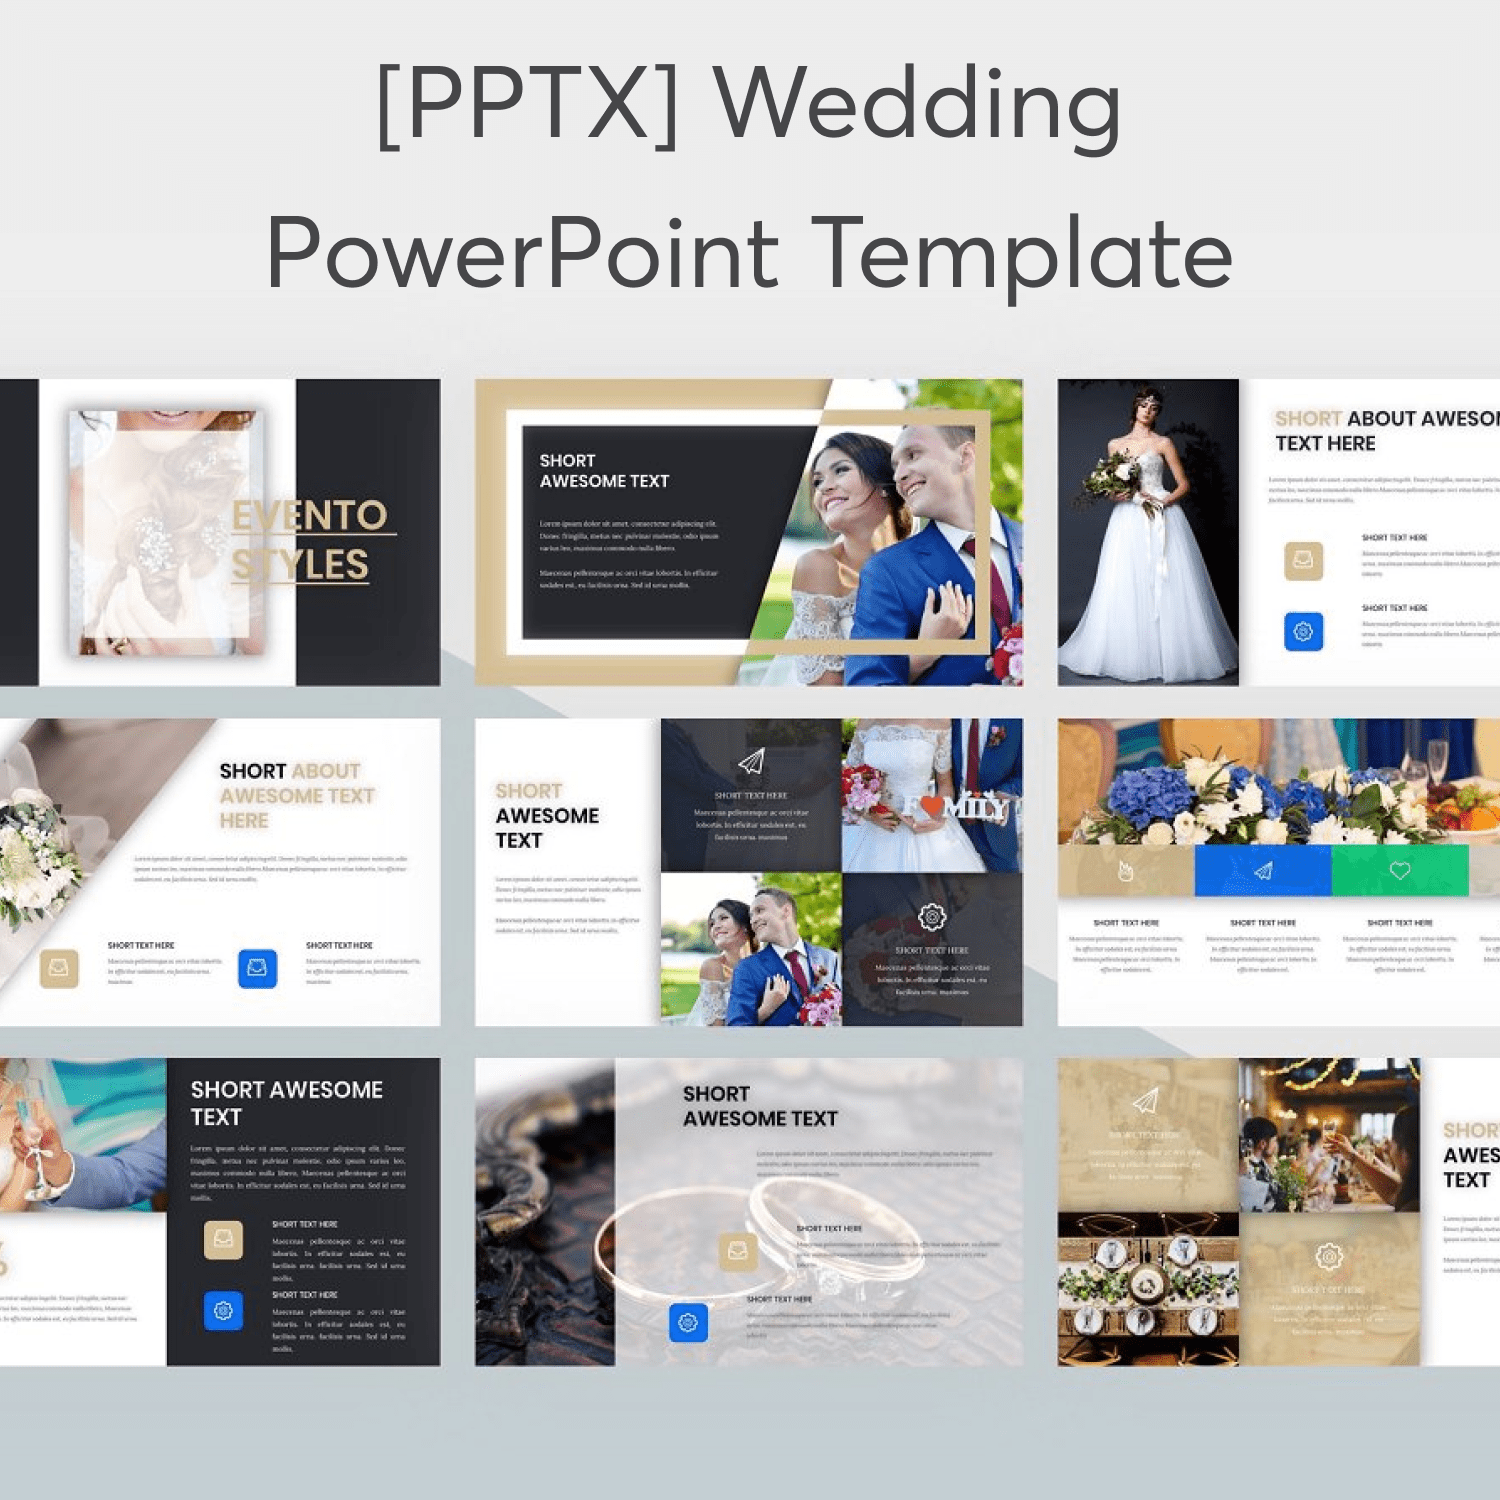 [PPTX] Wedding PowerPoint Template cover.